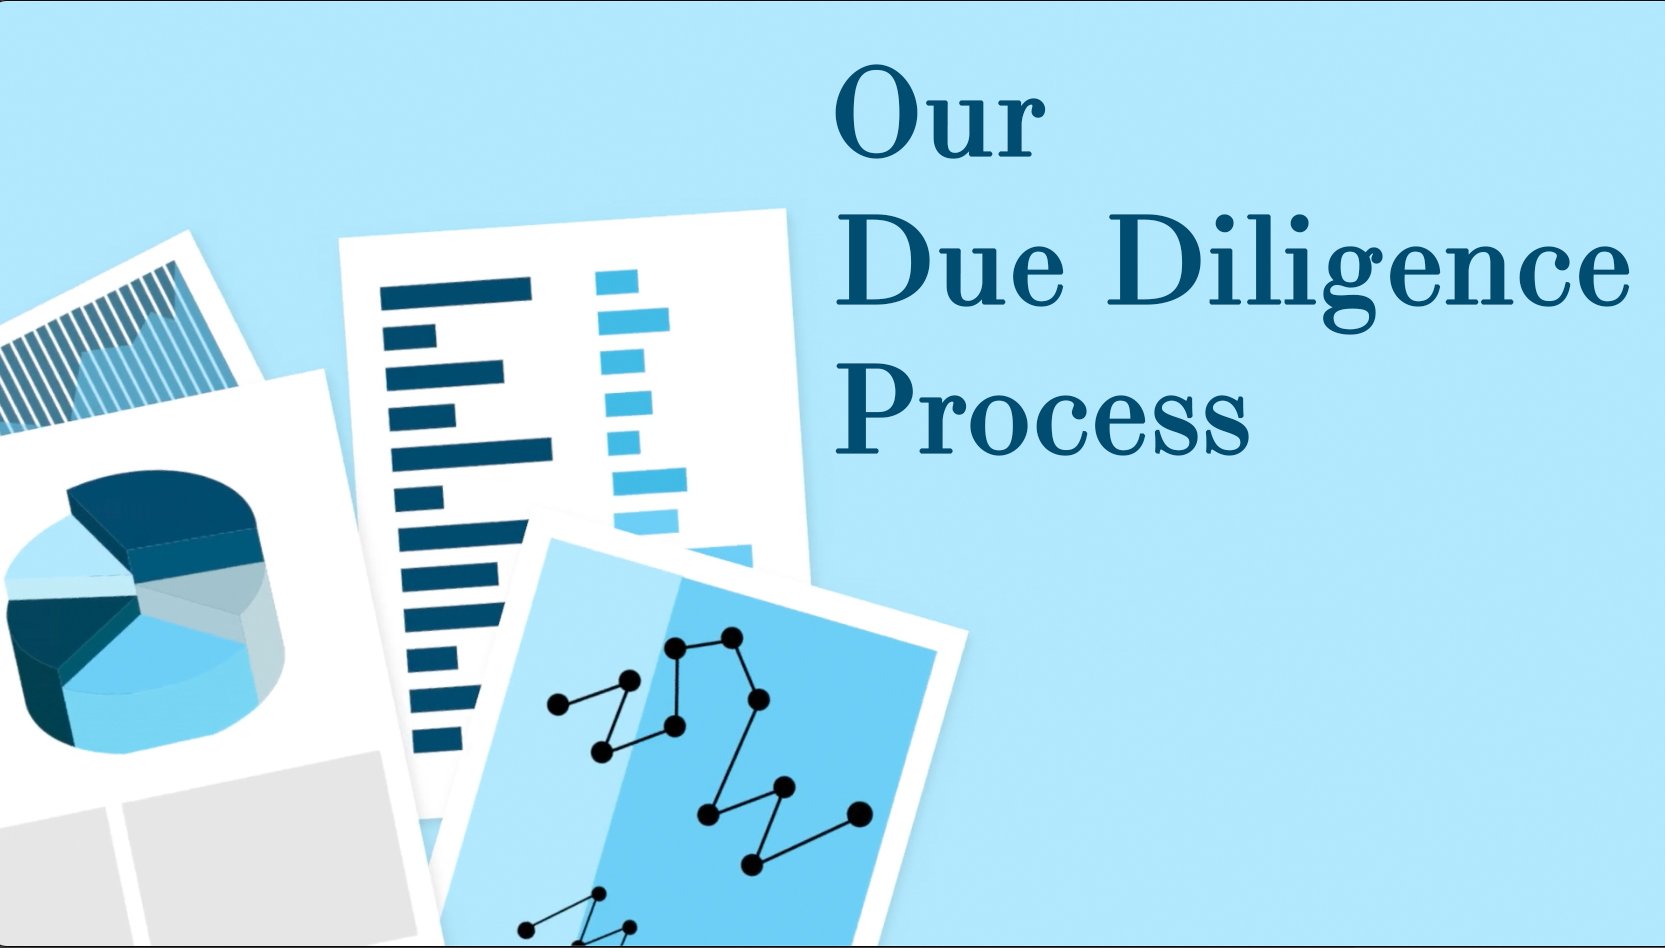 The Realized Due Diligence Process